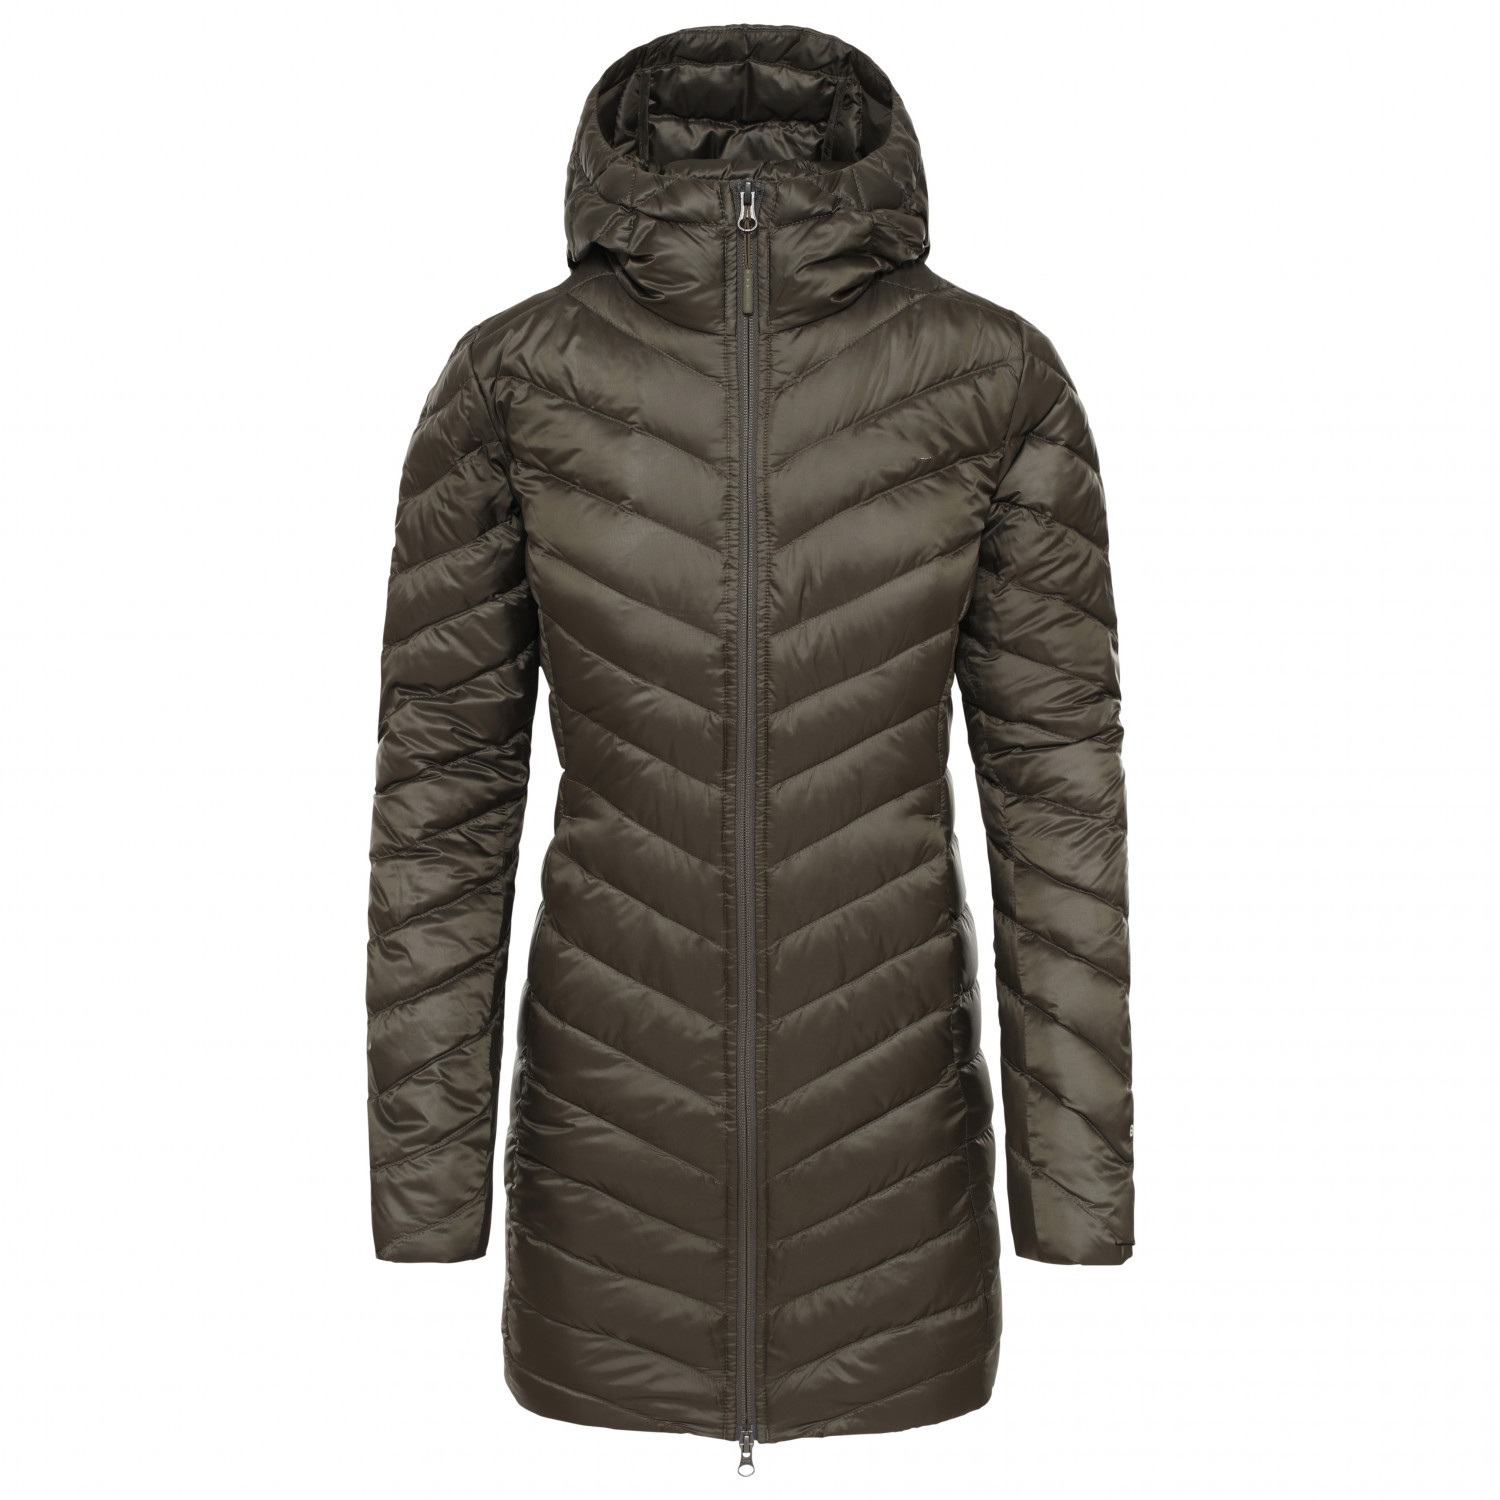 Women’s Long Down Jacket – Down Parka Featured Image